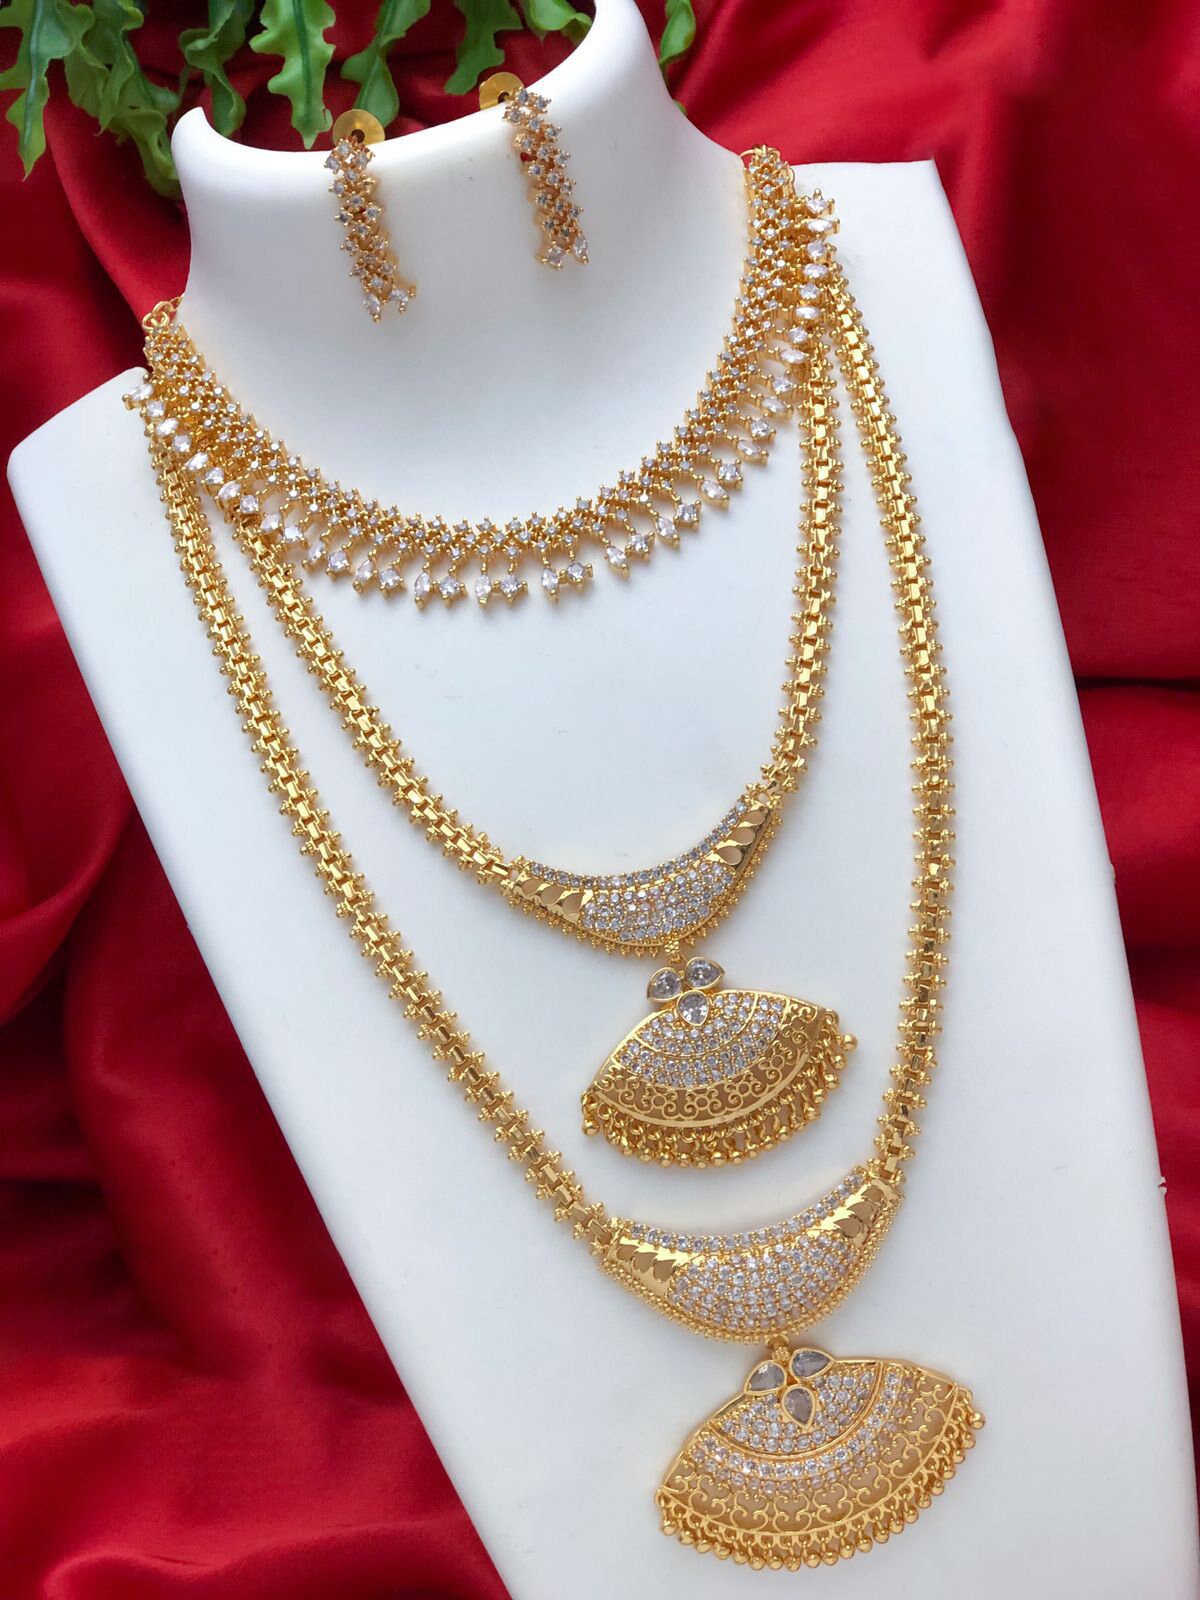 Photo of South Indian Long Gold Necklace for Layering